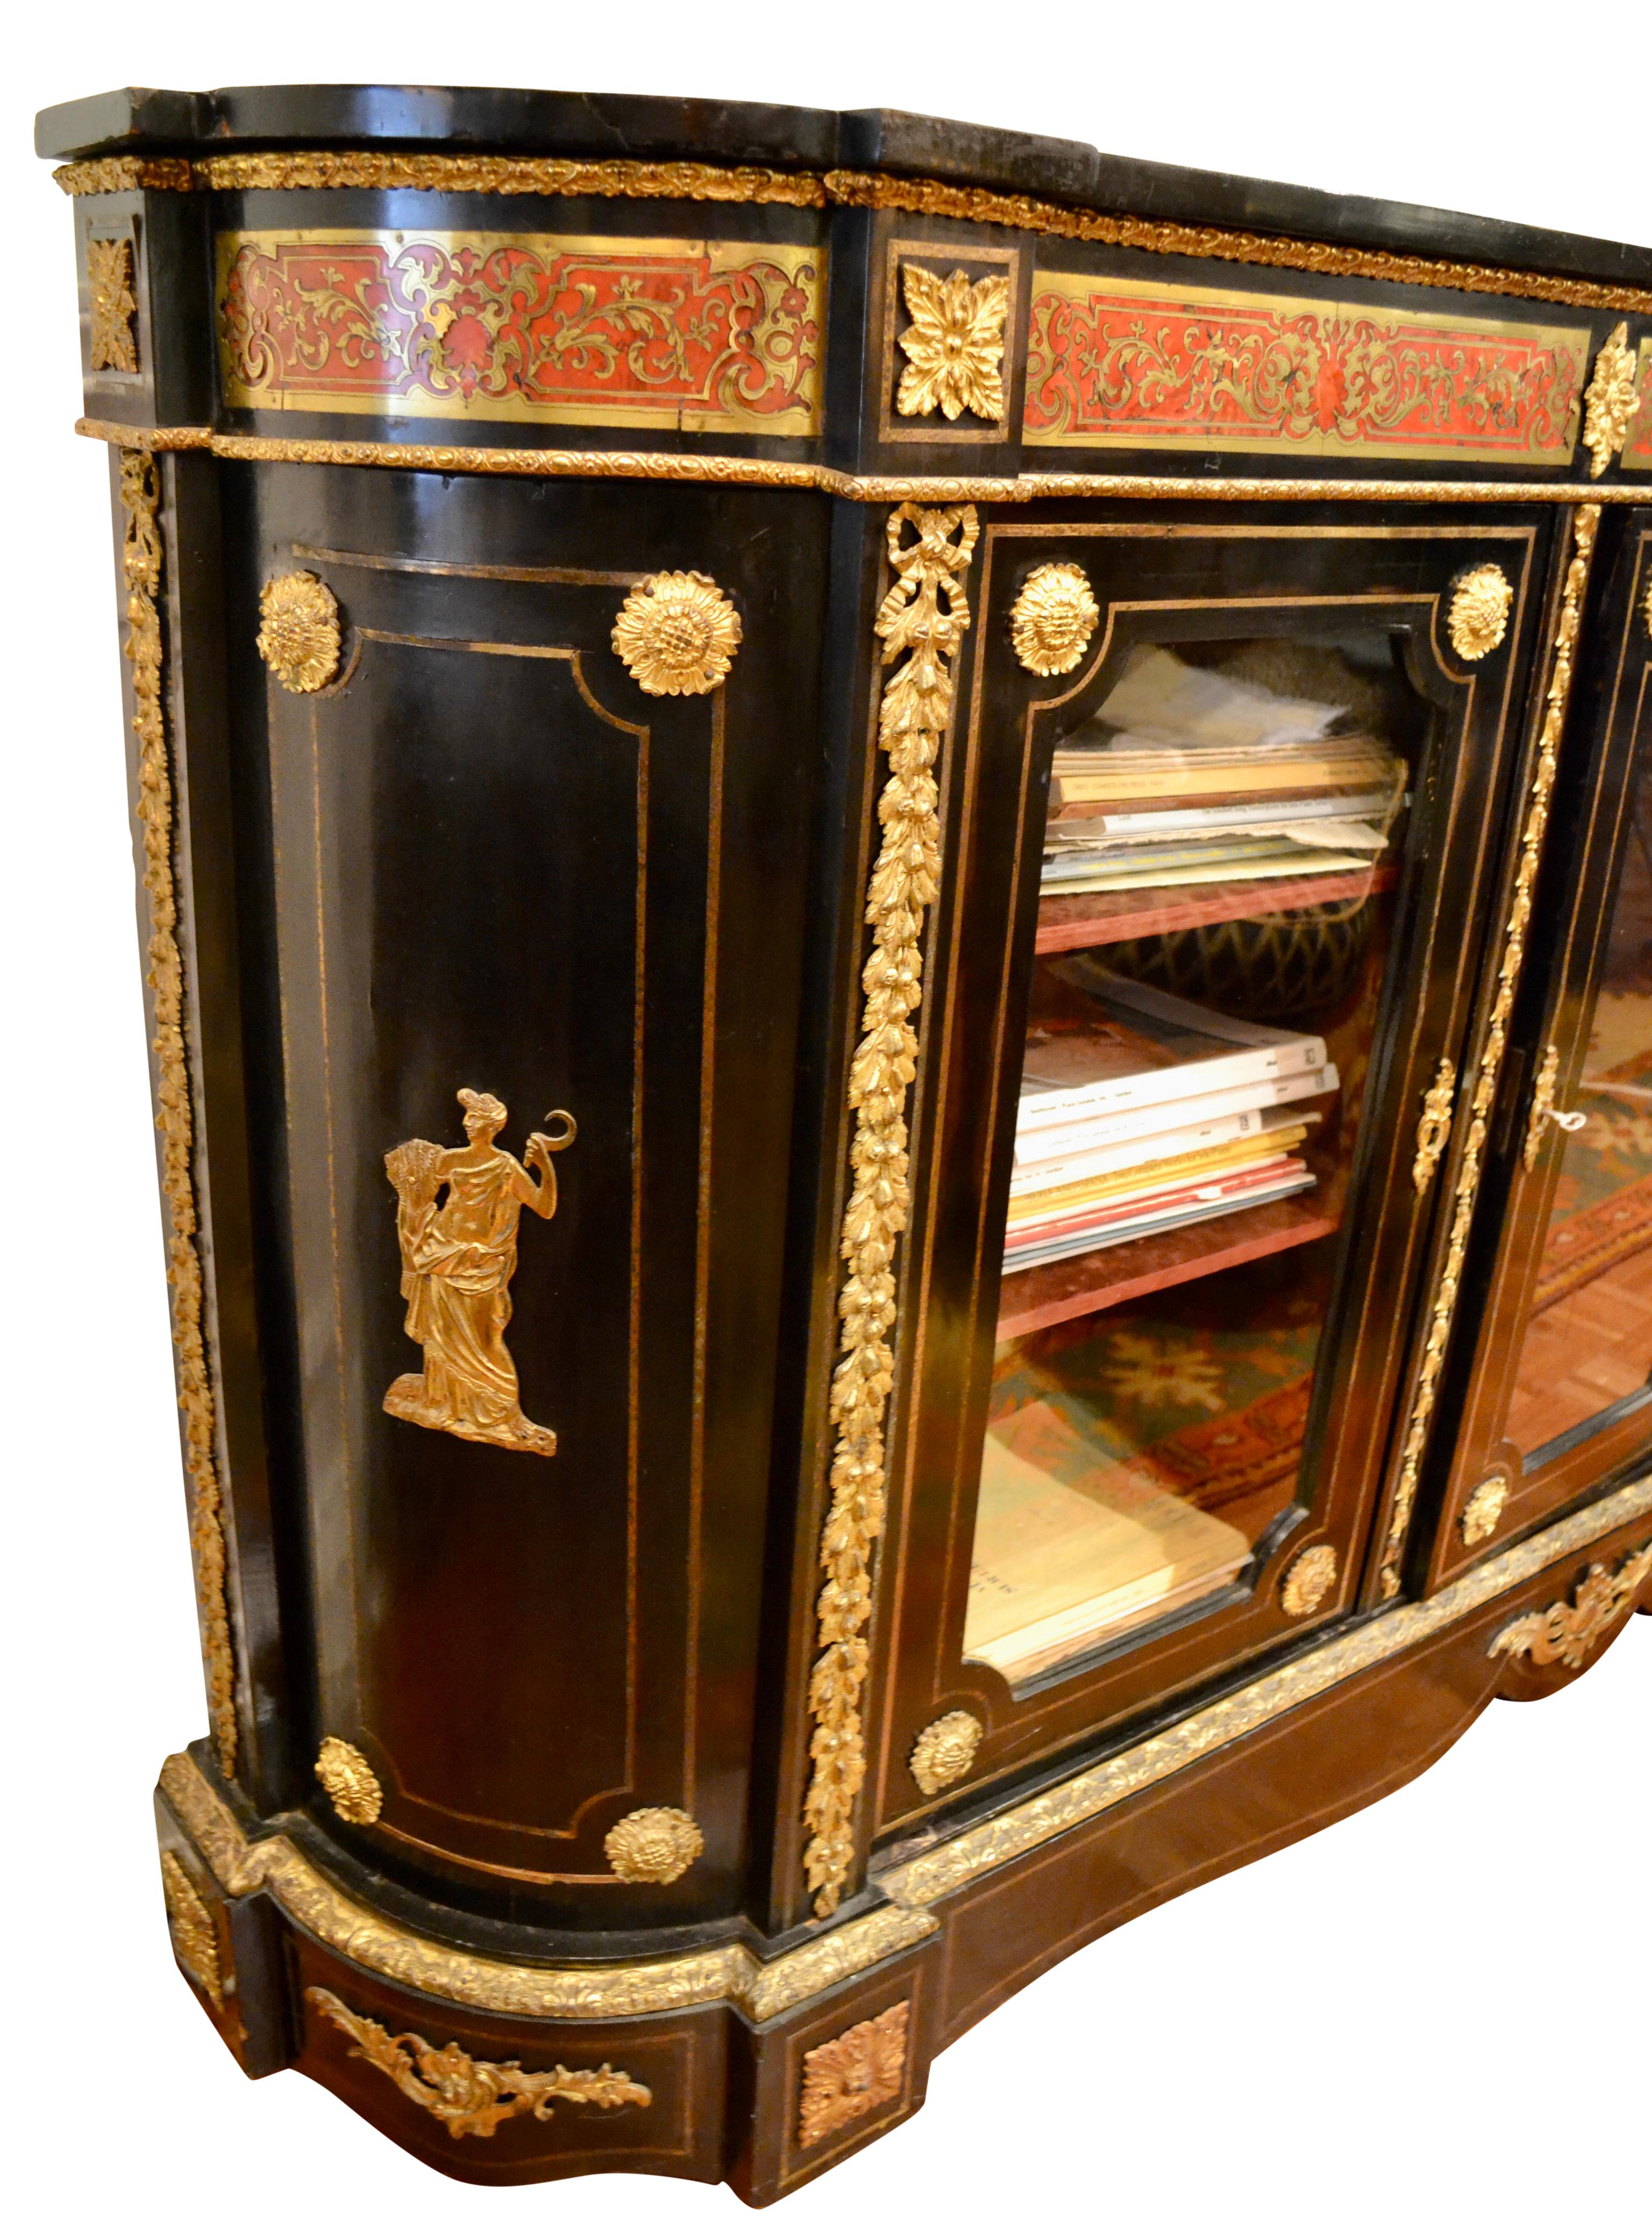 A handsome bookcase or china cabinet made in France in the last half of the 19th century. The case is in ebonized wood (including the top), and is curved at each side. There are three front doors with glass fronts and brass trim which open to reveal